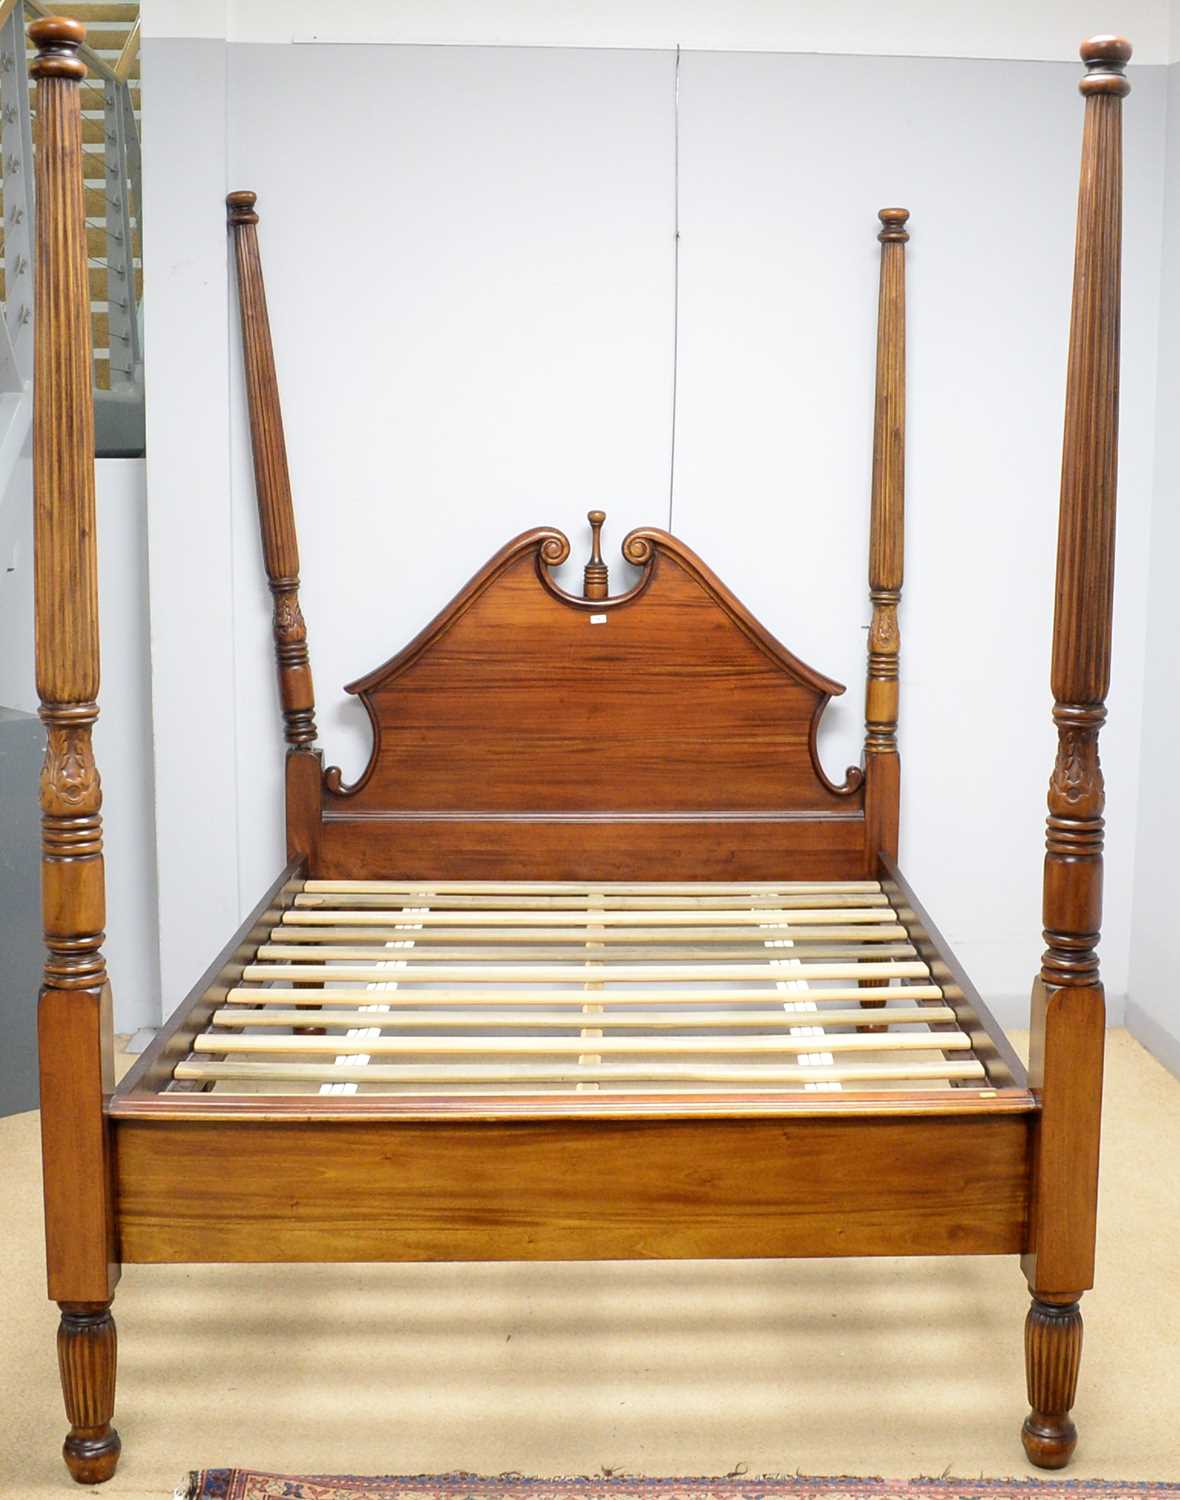 Lot 79 - A Regency style mahogany four poster double bed